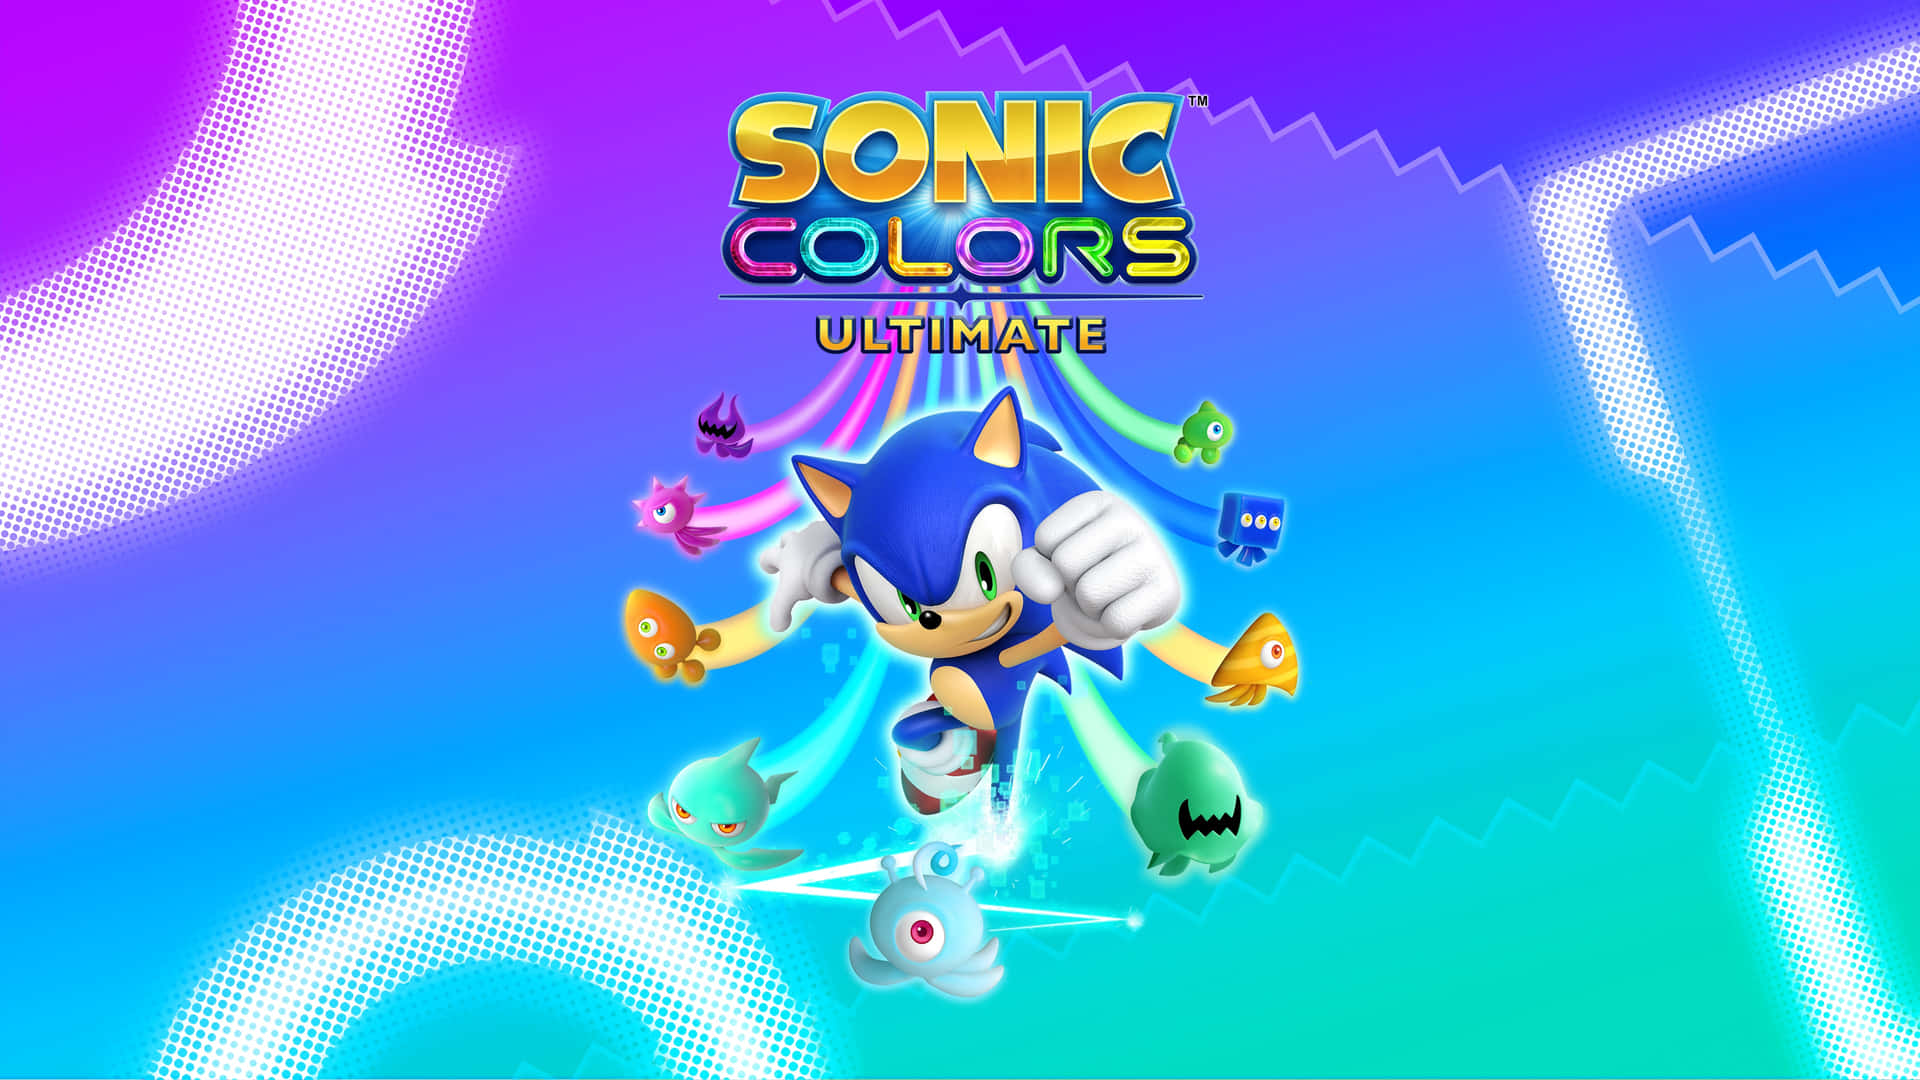 Sonic Colors - Unleash the Power of Sonic Unleashed! Wallpaper